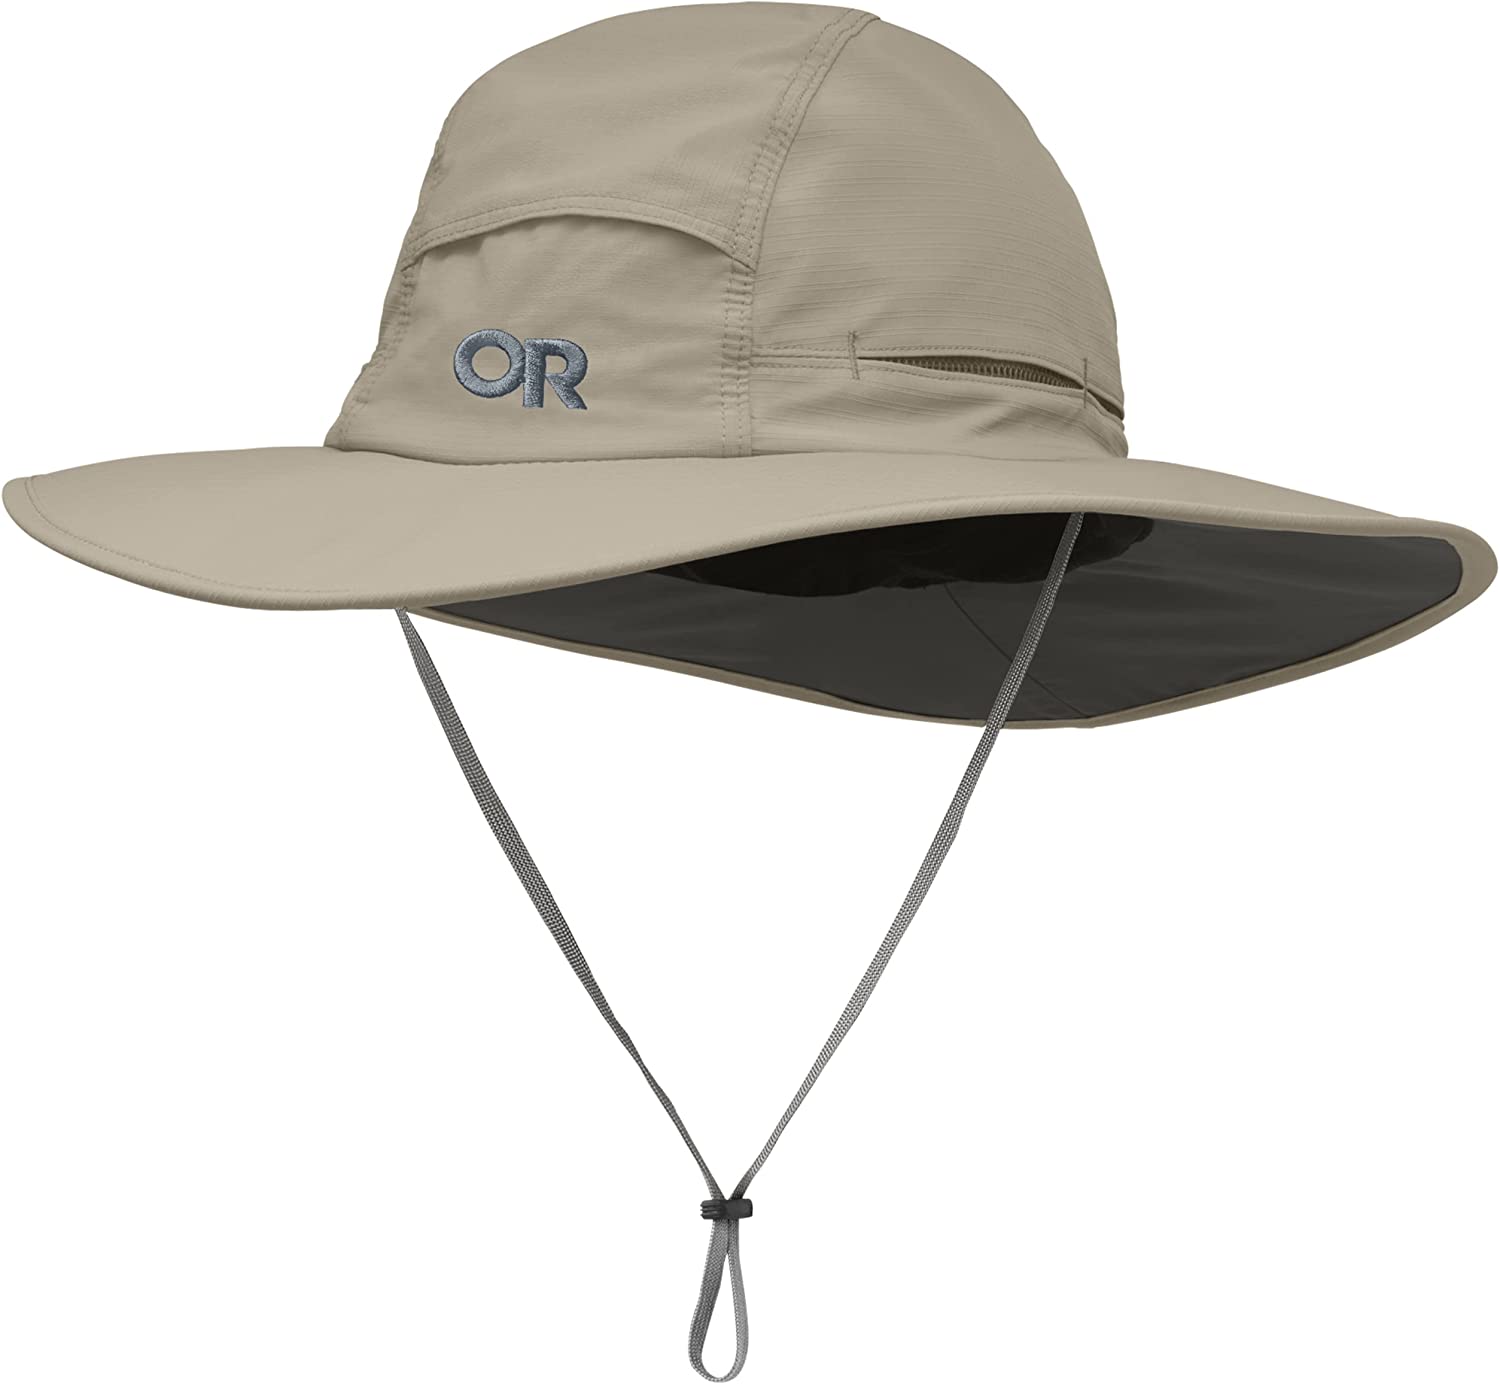 A wide brimmed hat for hiking.